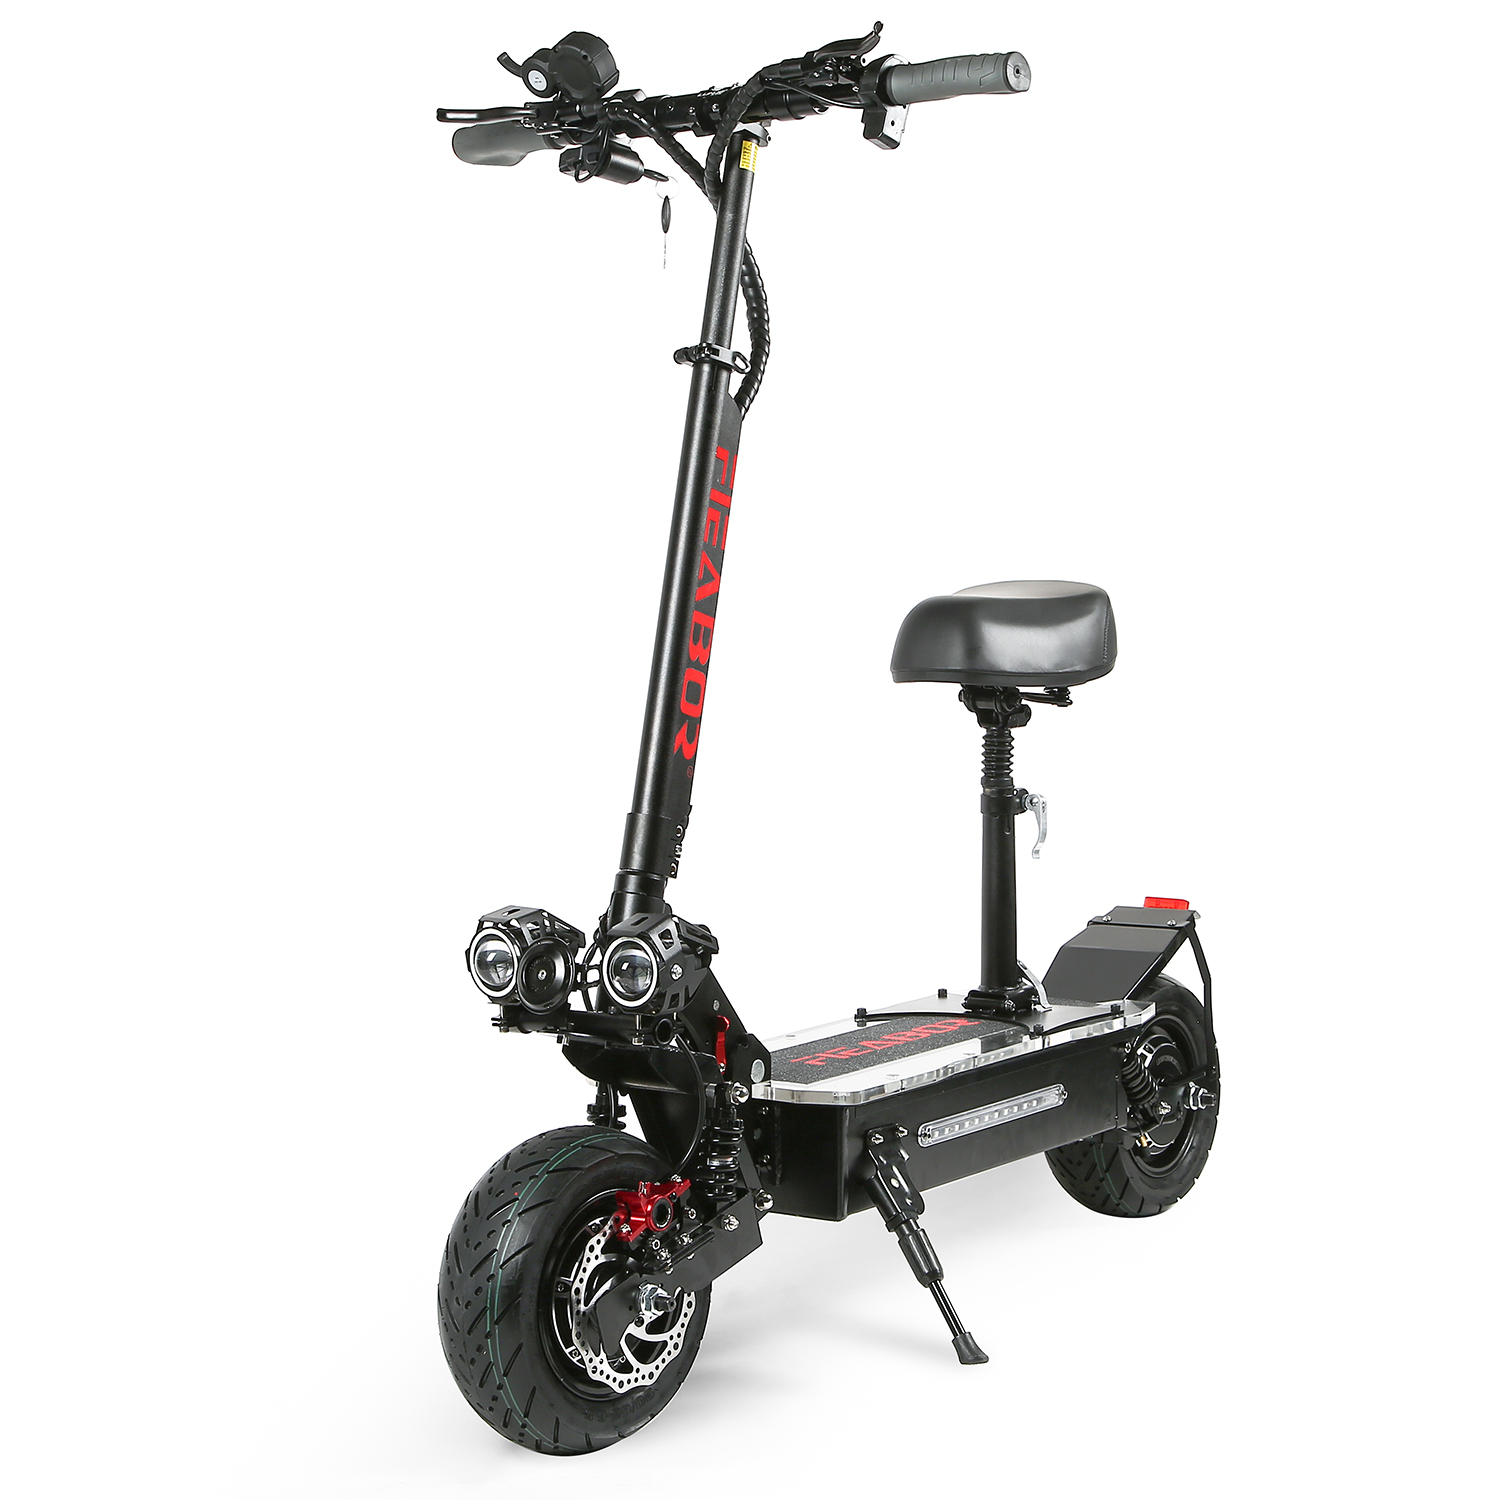 Find EU DIRECT FIEABOR Q06R Oil Brake 5600W 60V 27Ah Dual Motor 11 Inch Road Tire Electric Scooter 60 80Km Range 200Kg Max Load for Sale on Gipsybee.com with cryptocurrencies